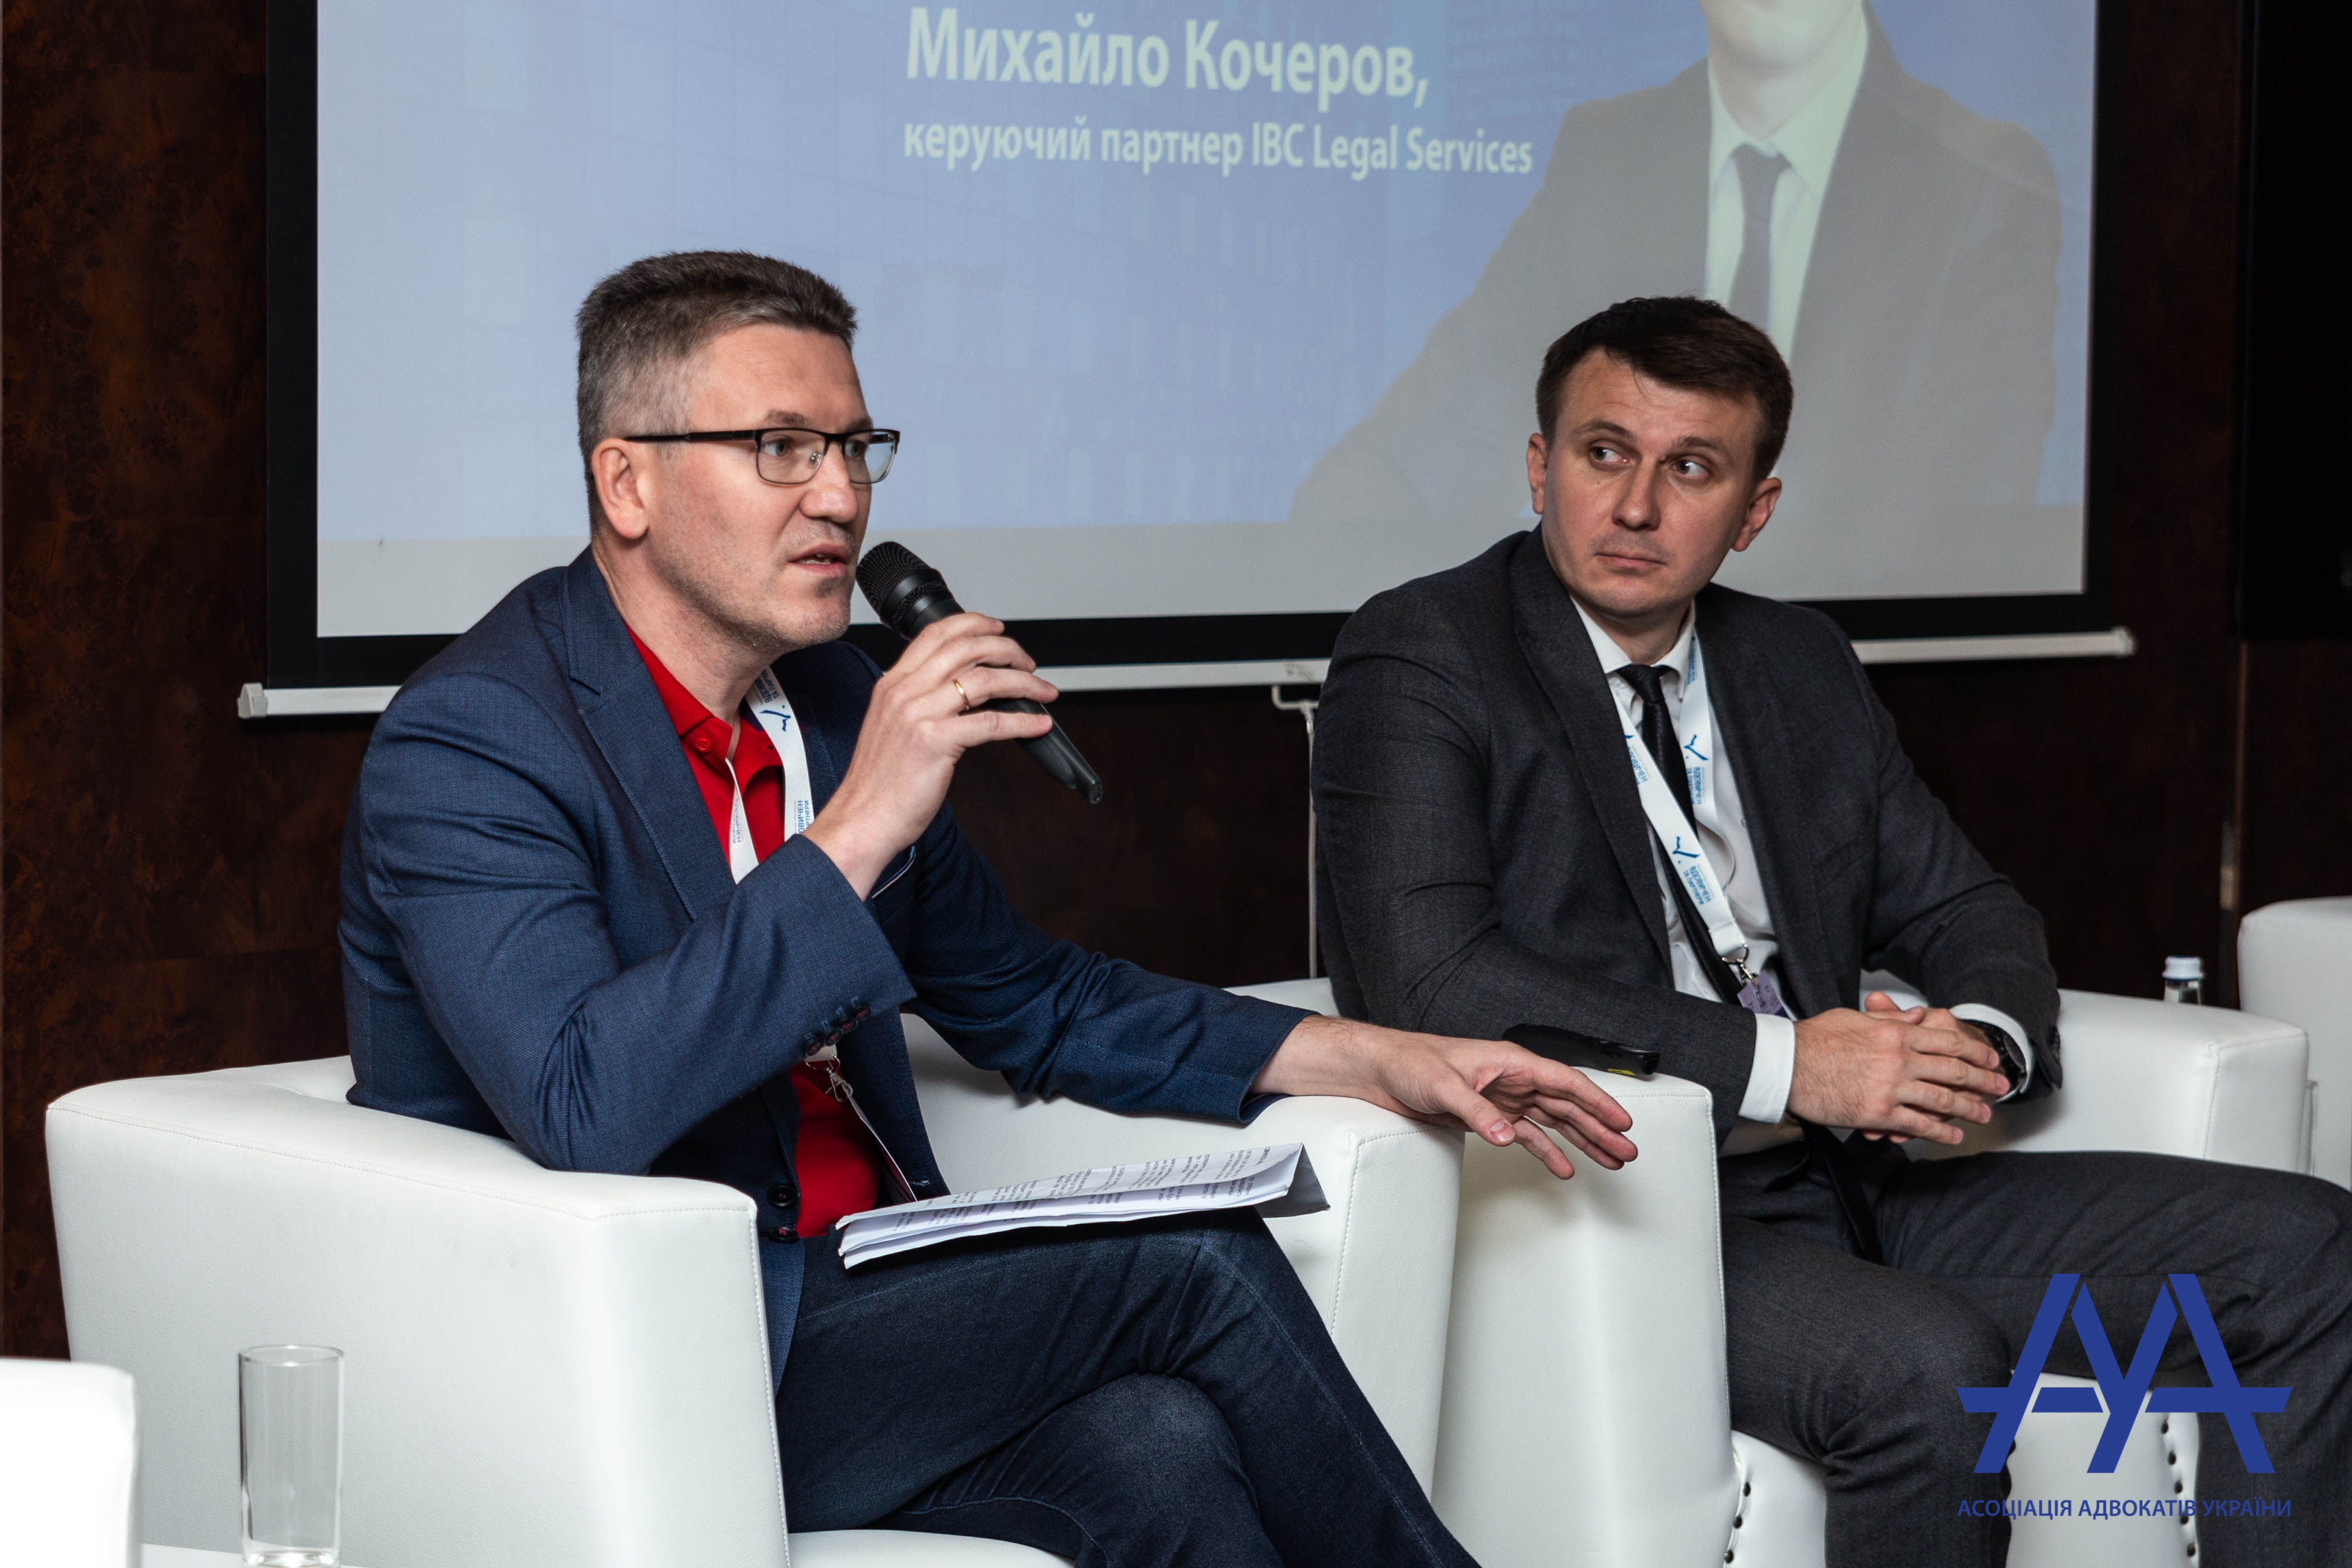 On September 20, 2019, another forum of the Ukrainian Advocates' Association was held